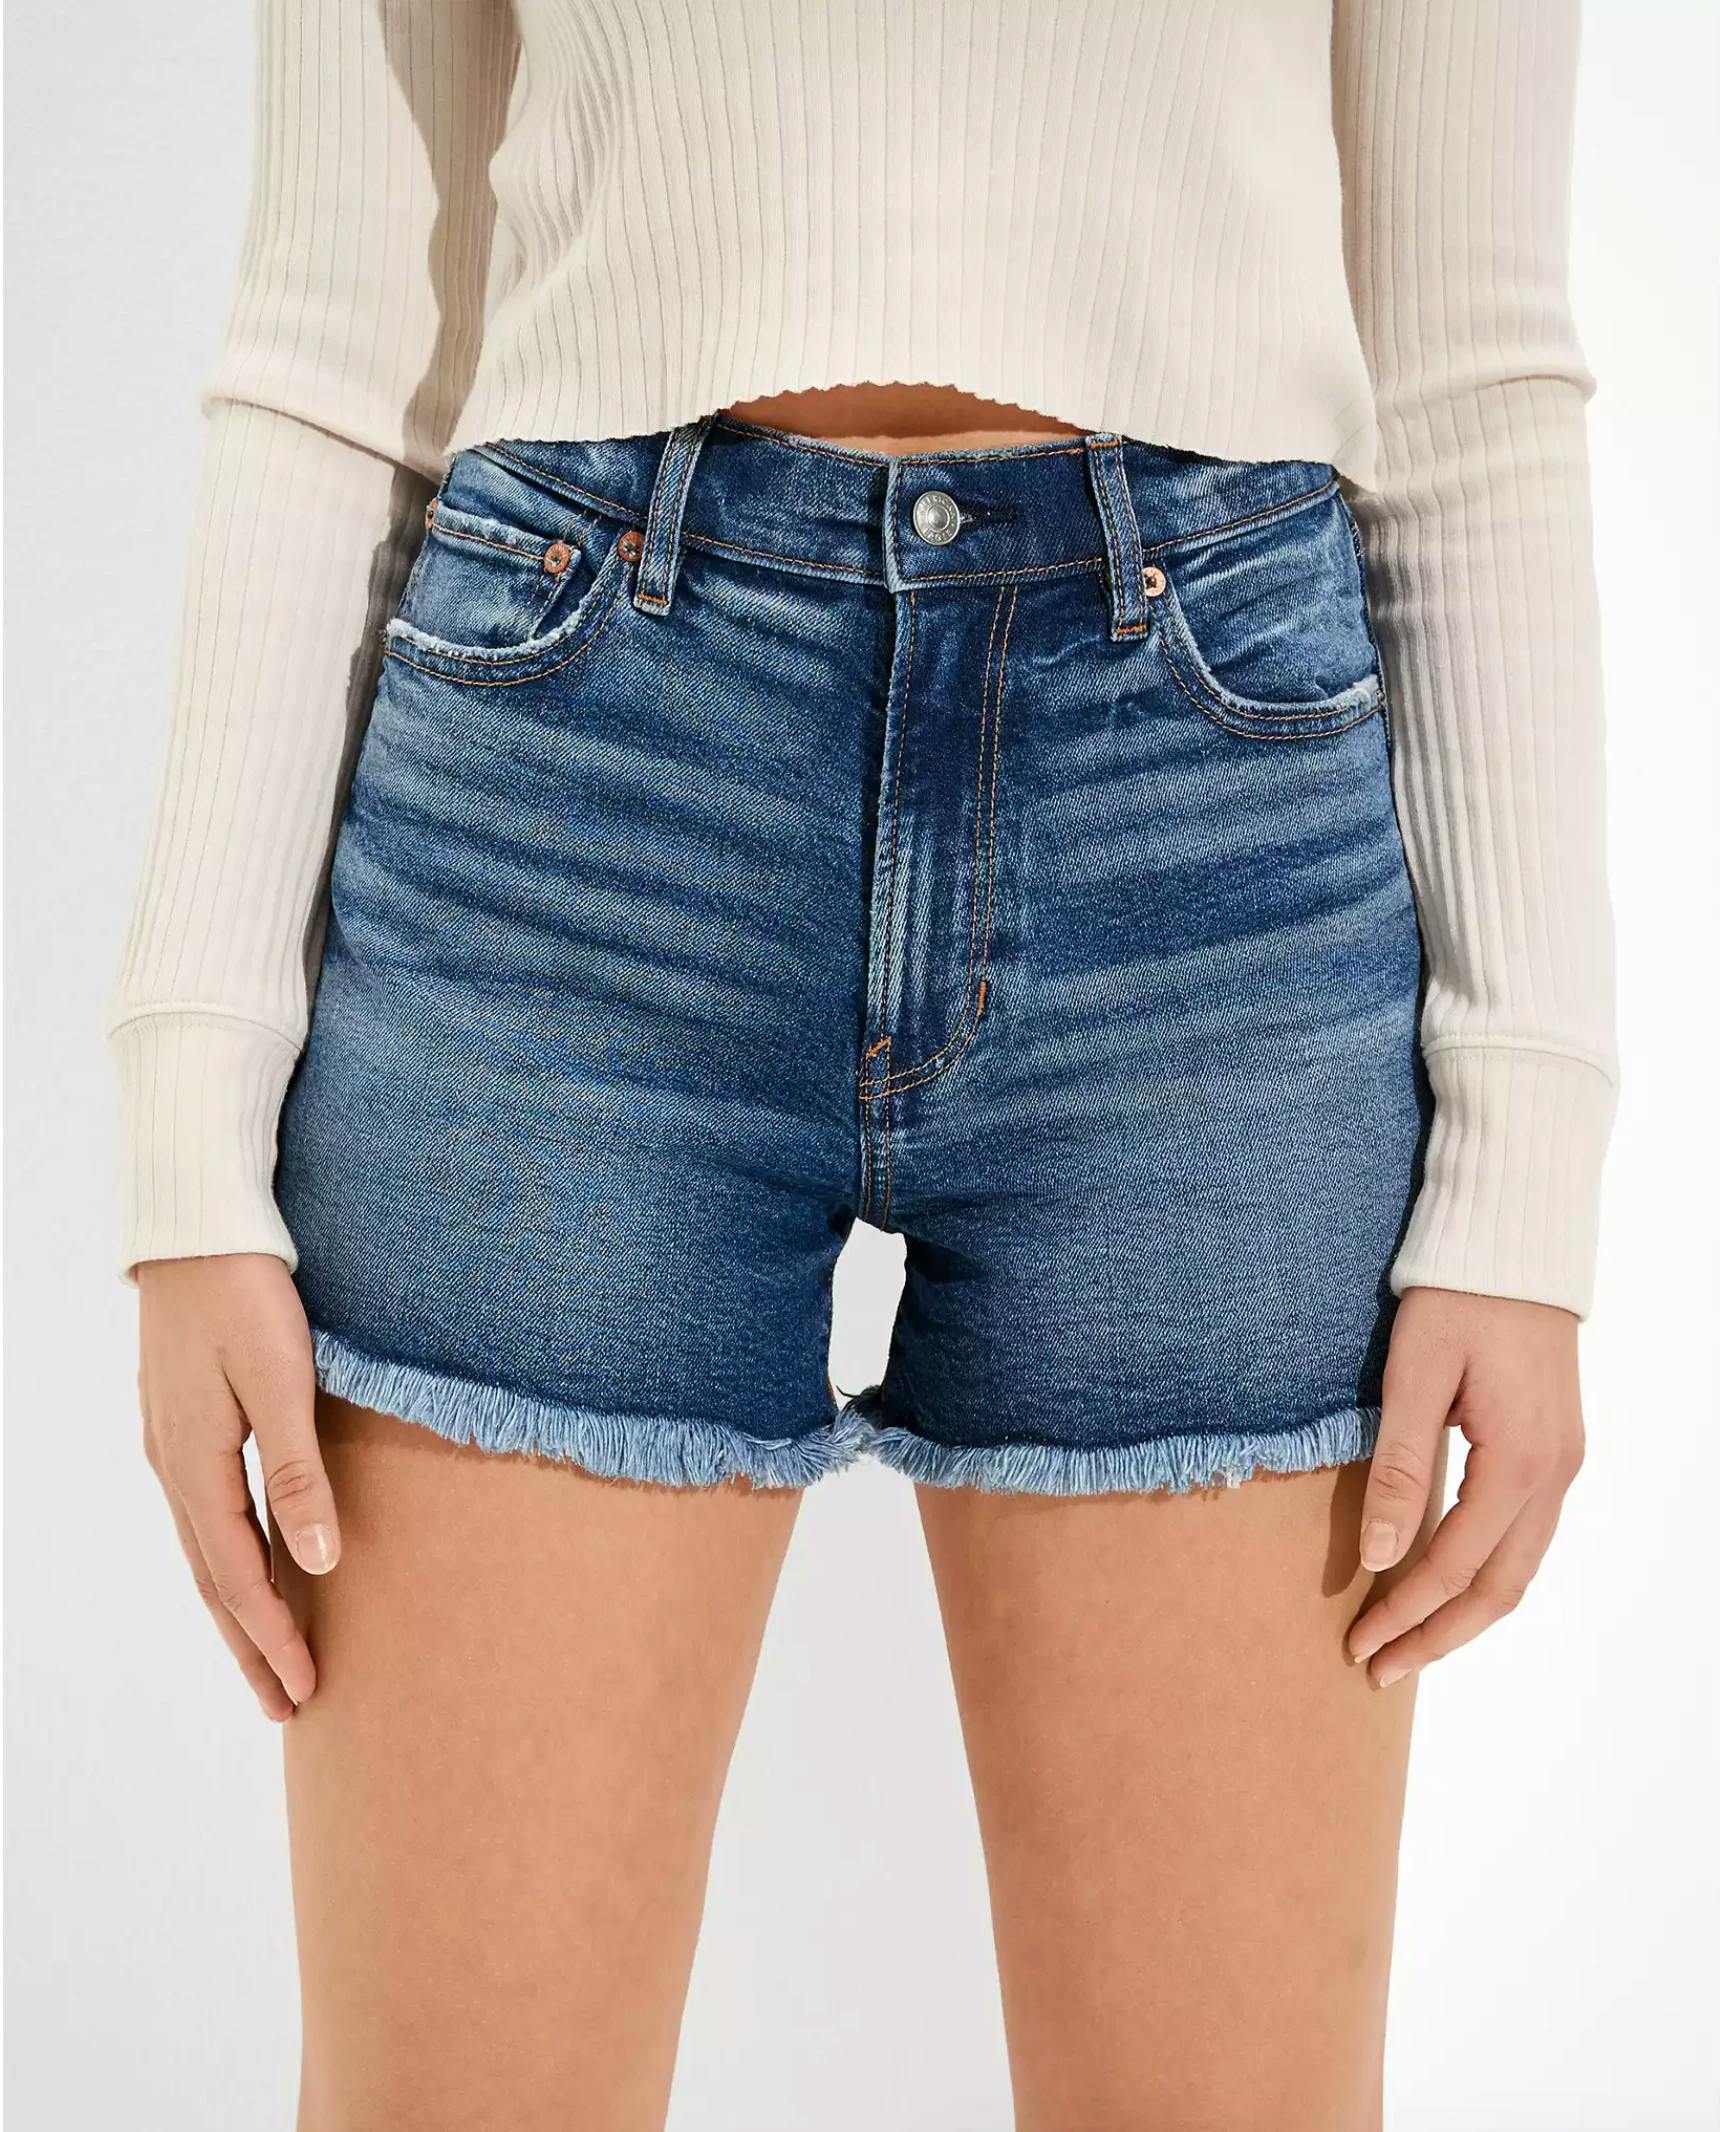 Denim shorts recommendations for my fellow pear-shaped bodies 🫶 #deni